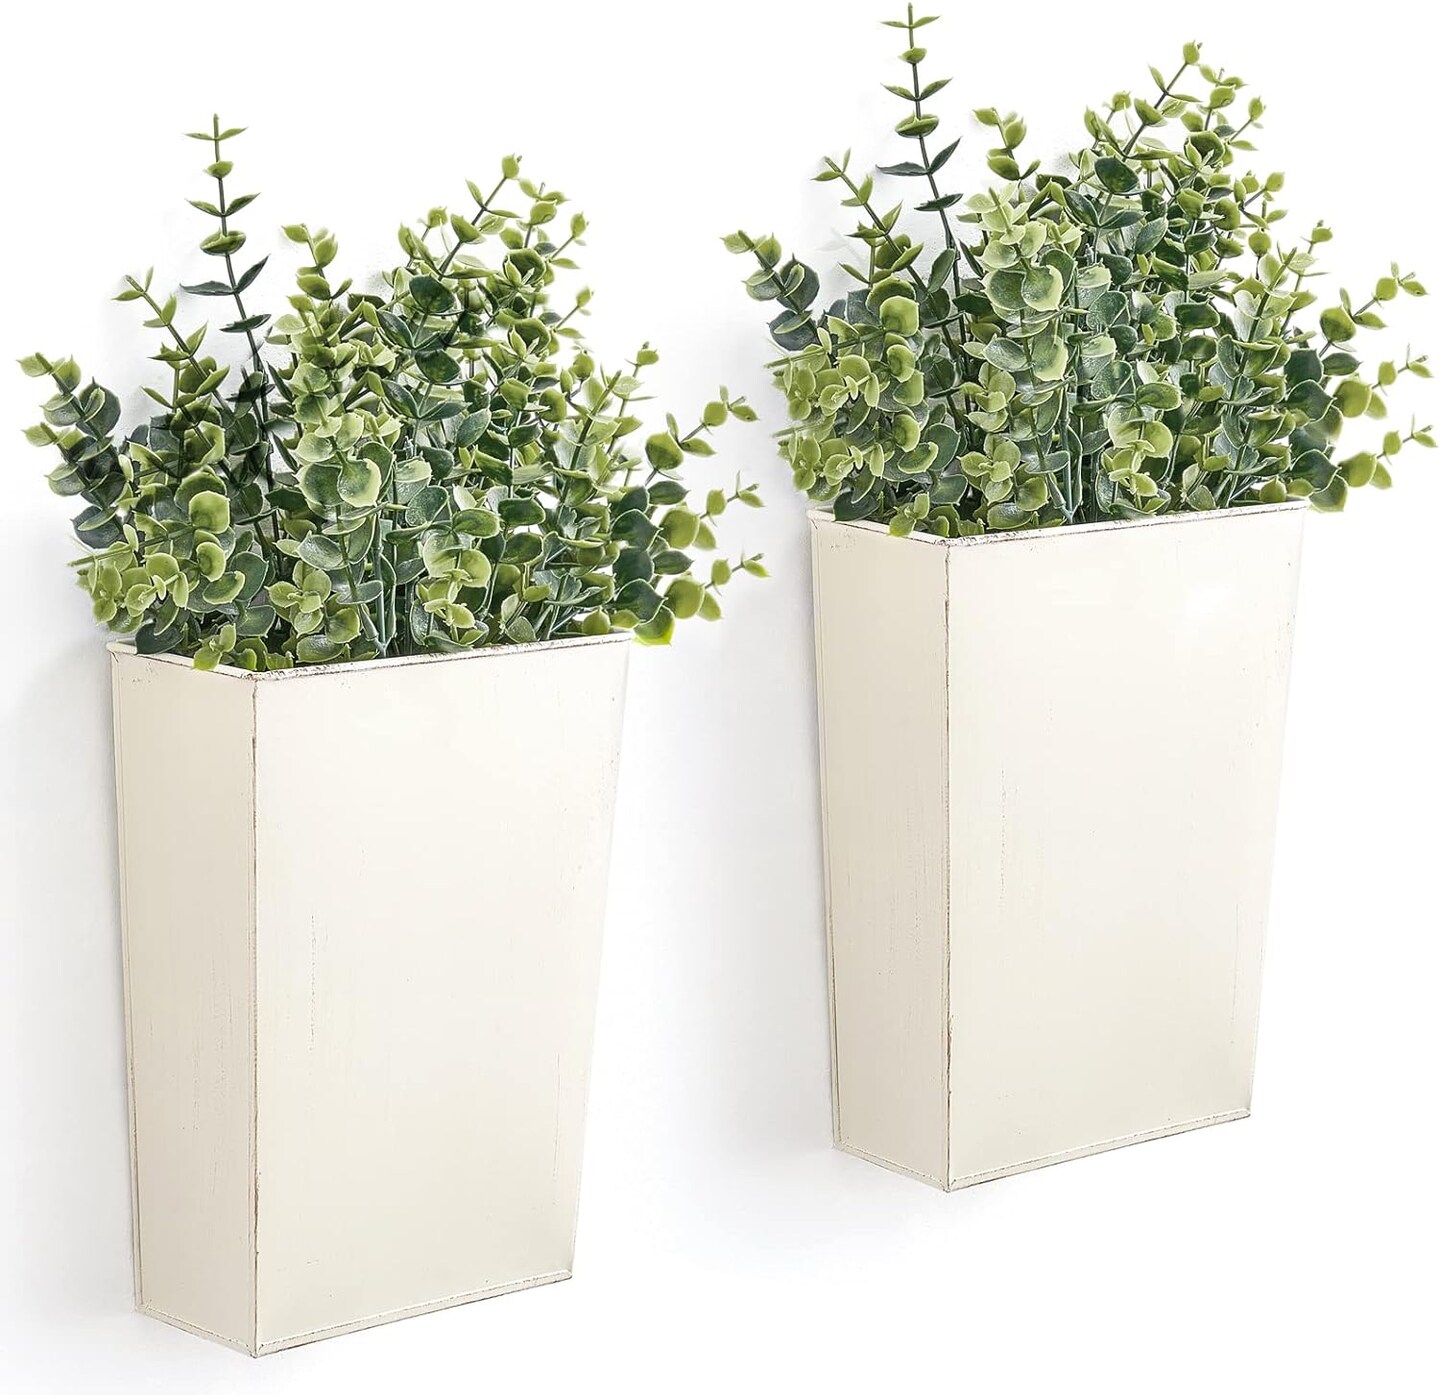 2 Pack Metal Wall Planter with Artificial Plants - Rustic White Hanging Vase for Farmhouse Decor